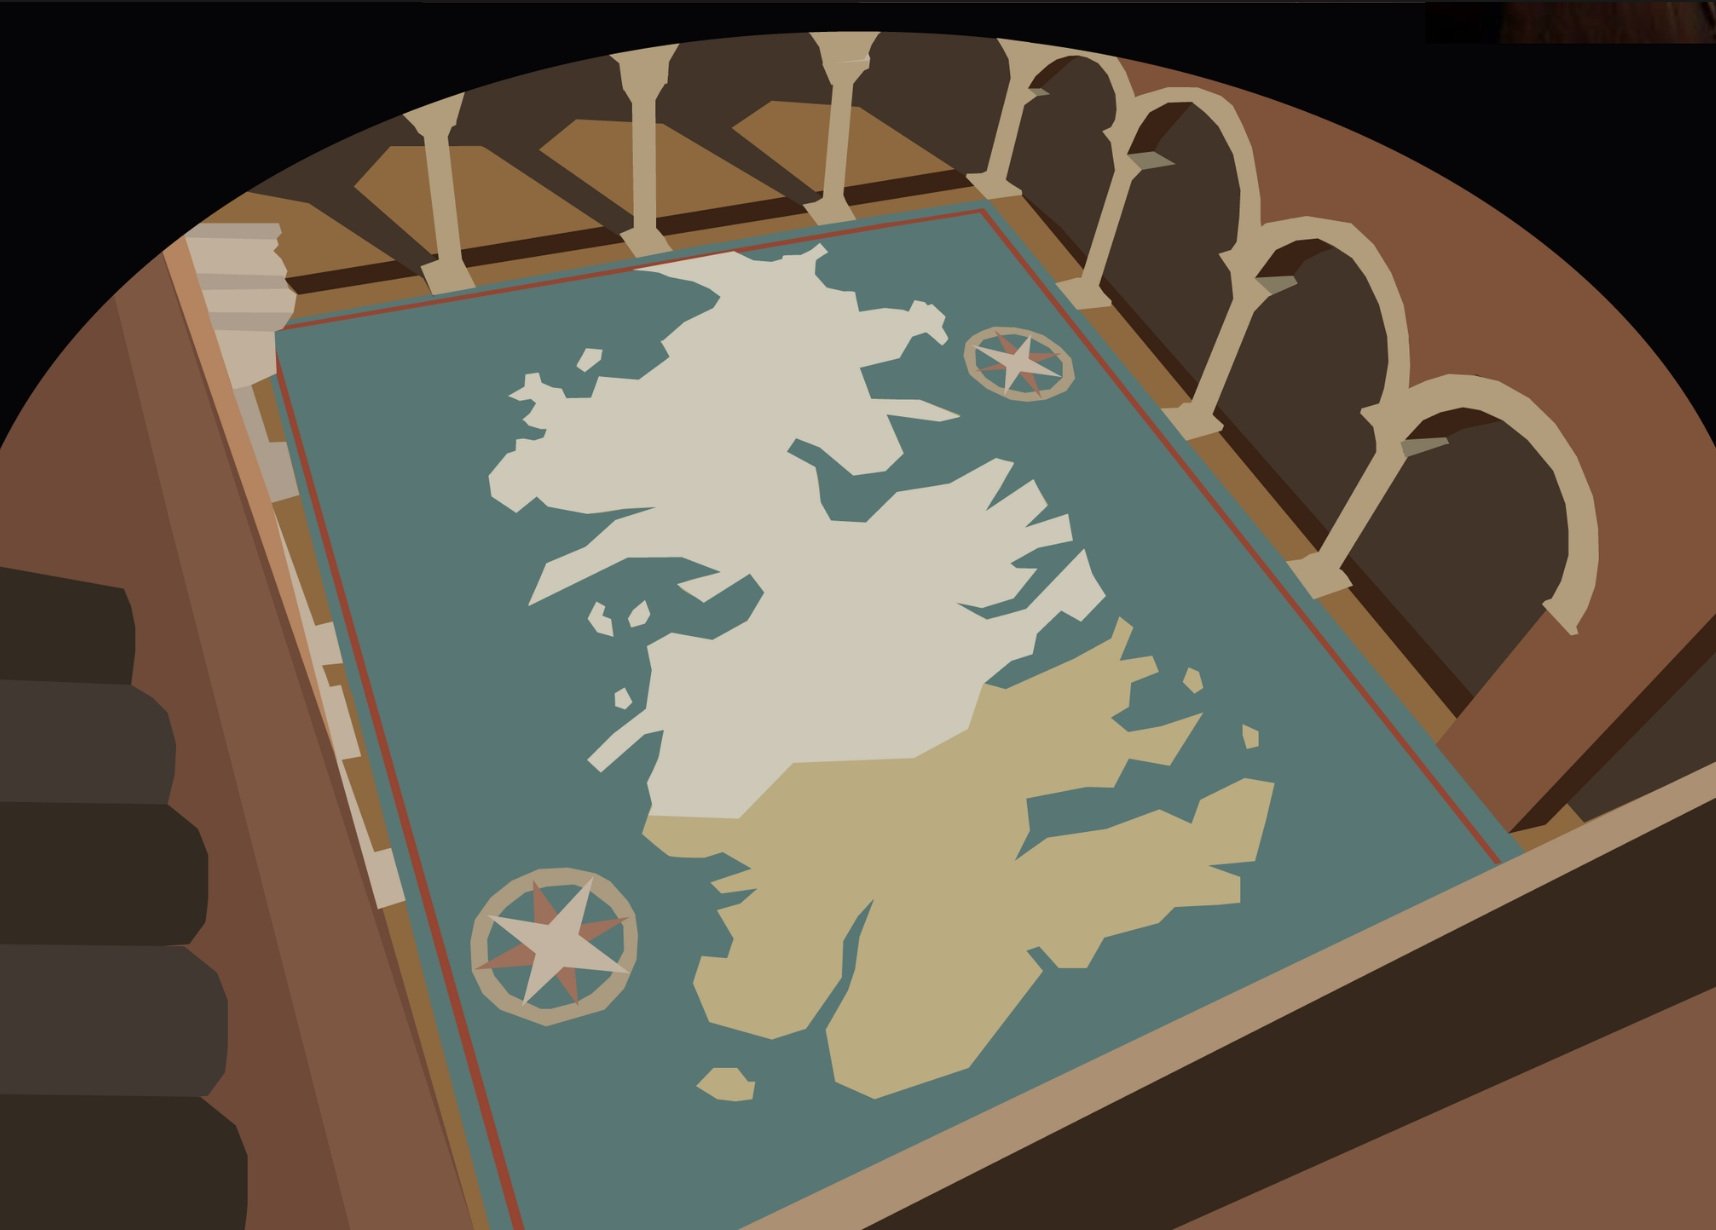 Game of Thrones spin off for Reigns teased